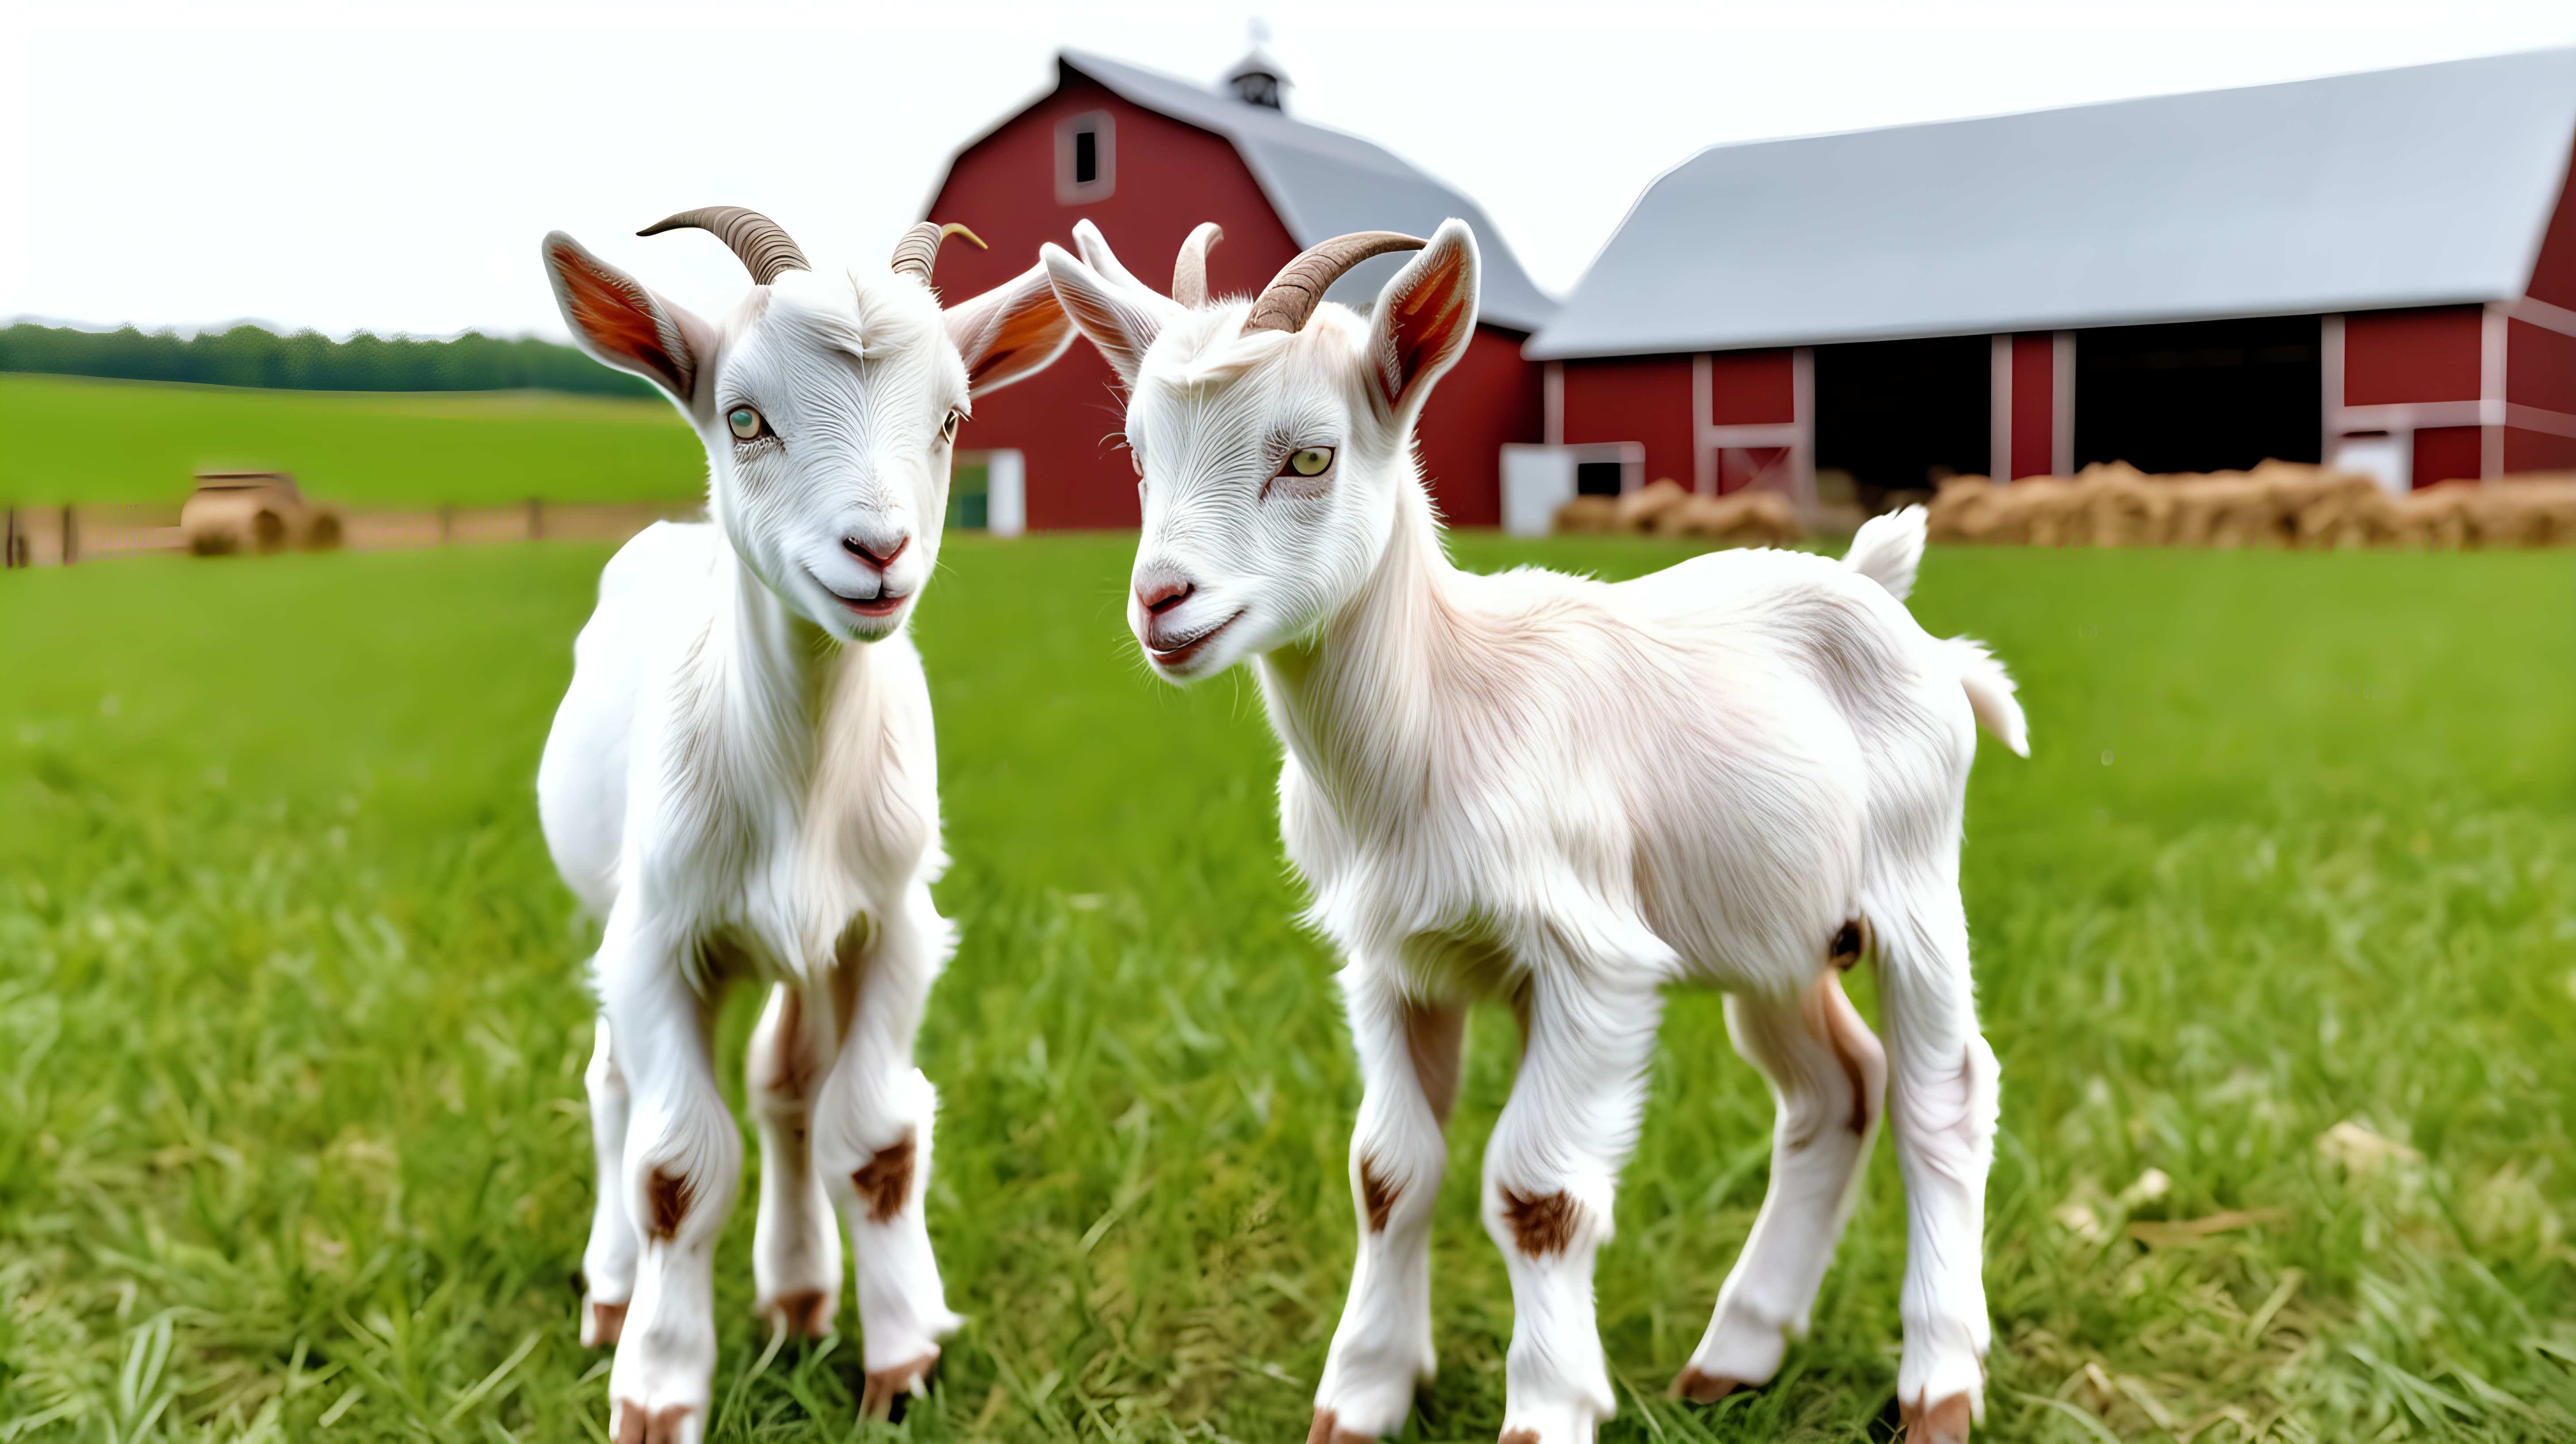 two baby goat in feild, farm barn background, isolated on background